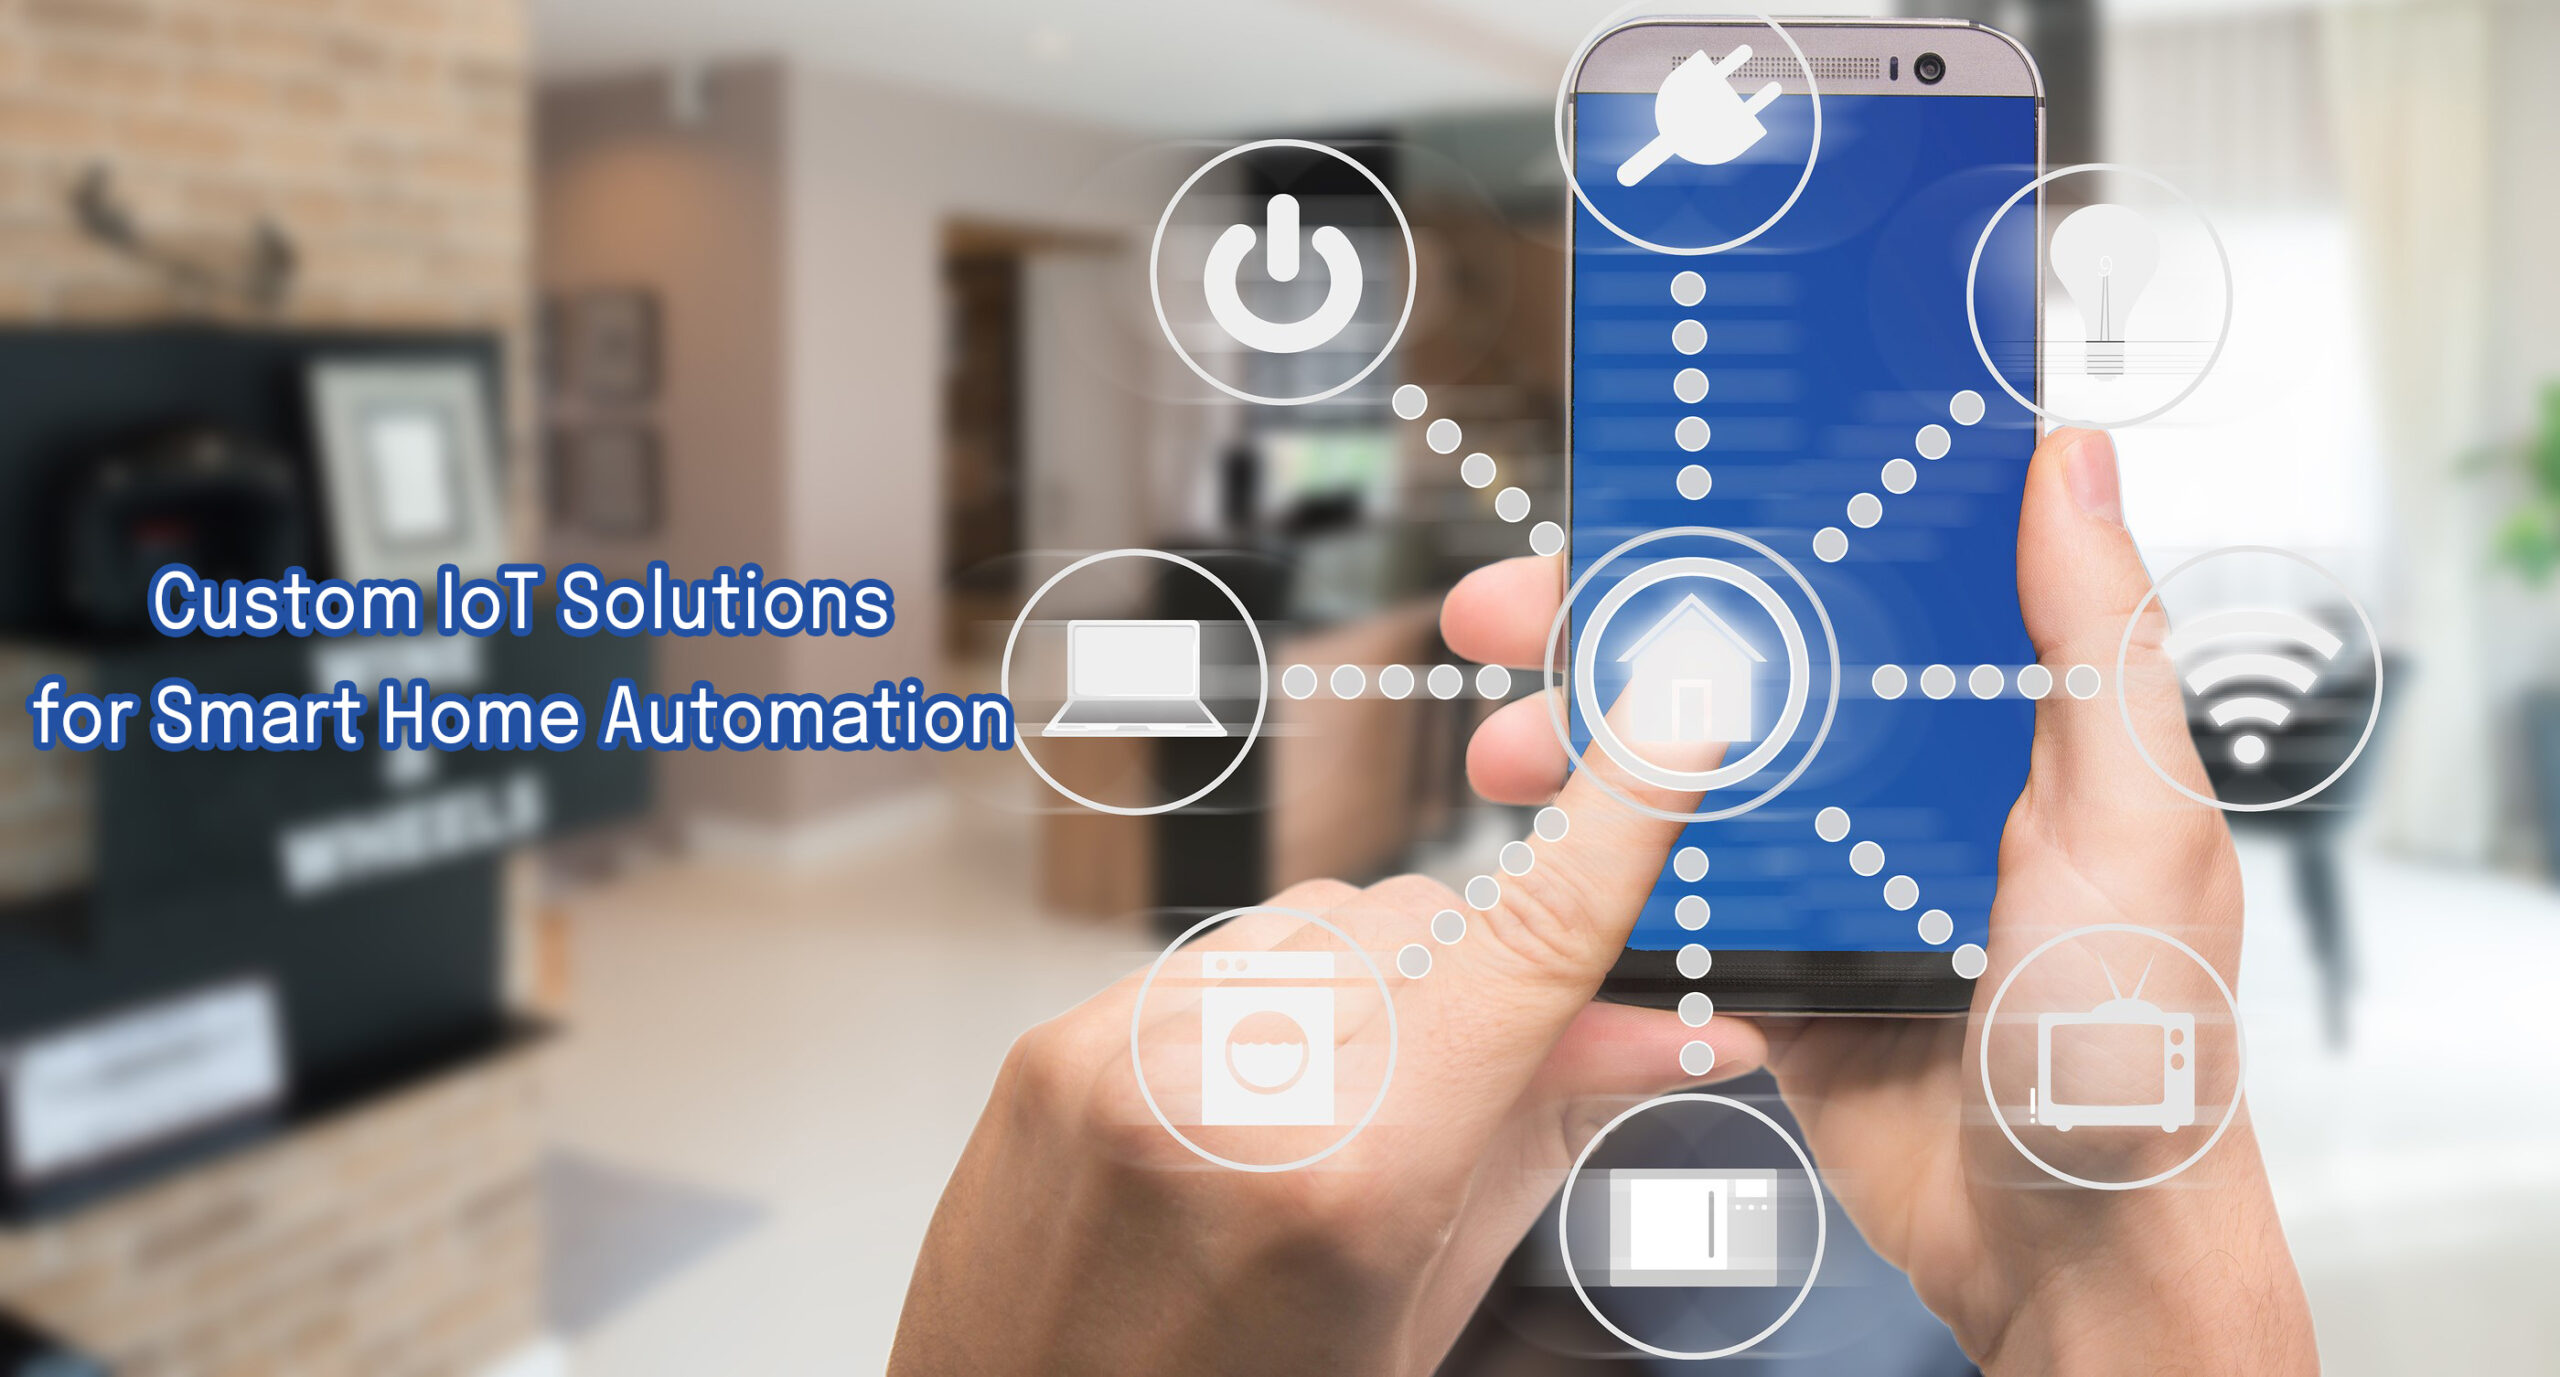 Custom IoT solutions for Smart Home Automation